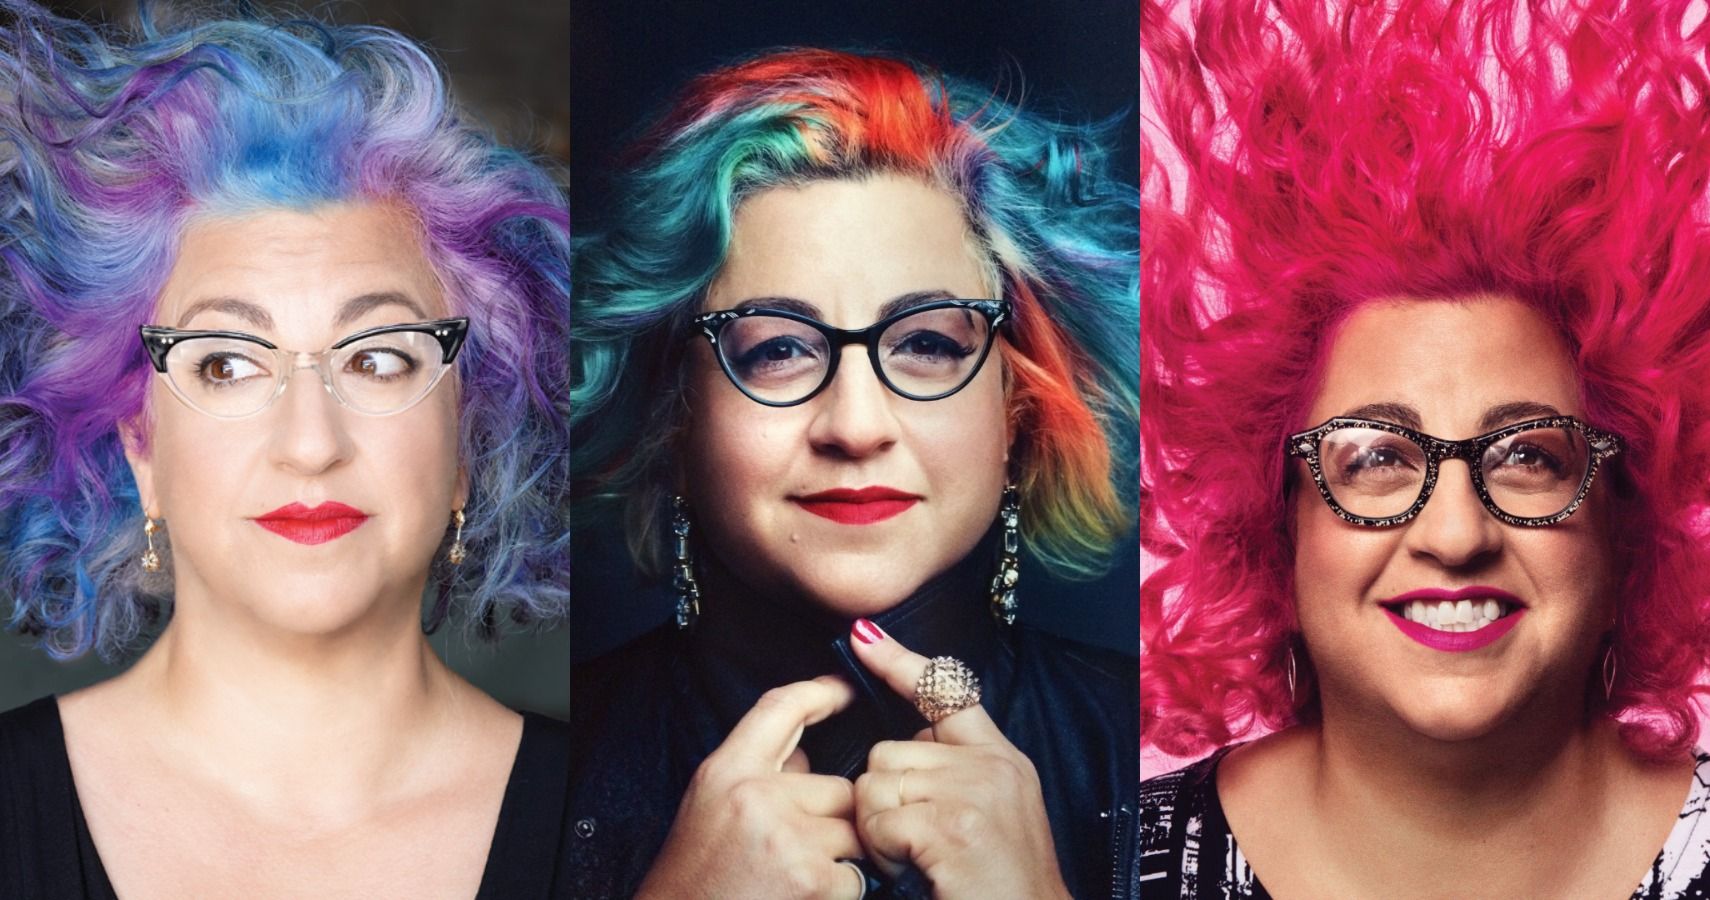 Jenji Kohan Three Pictures With Colorful Hair